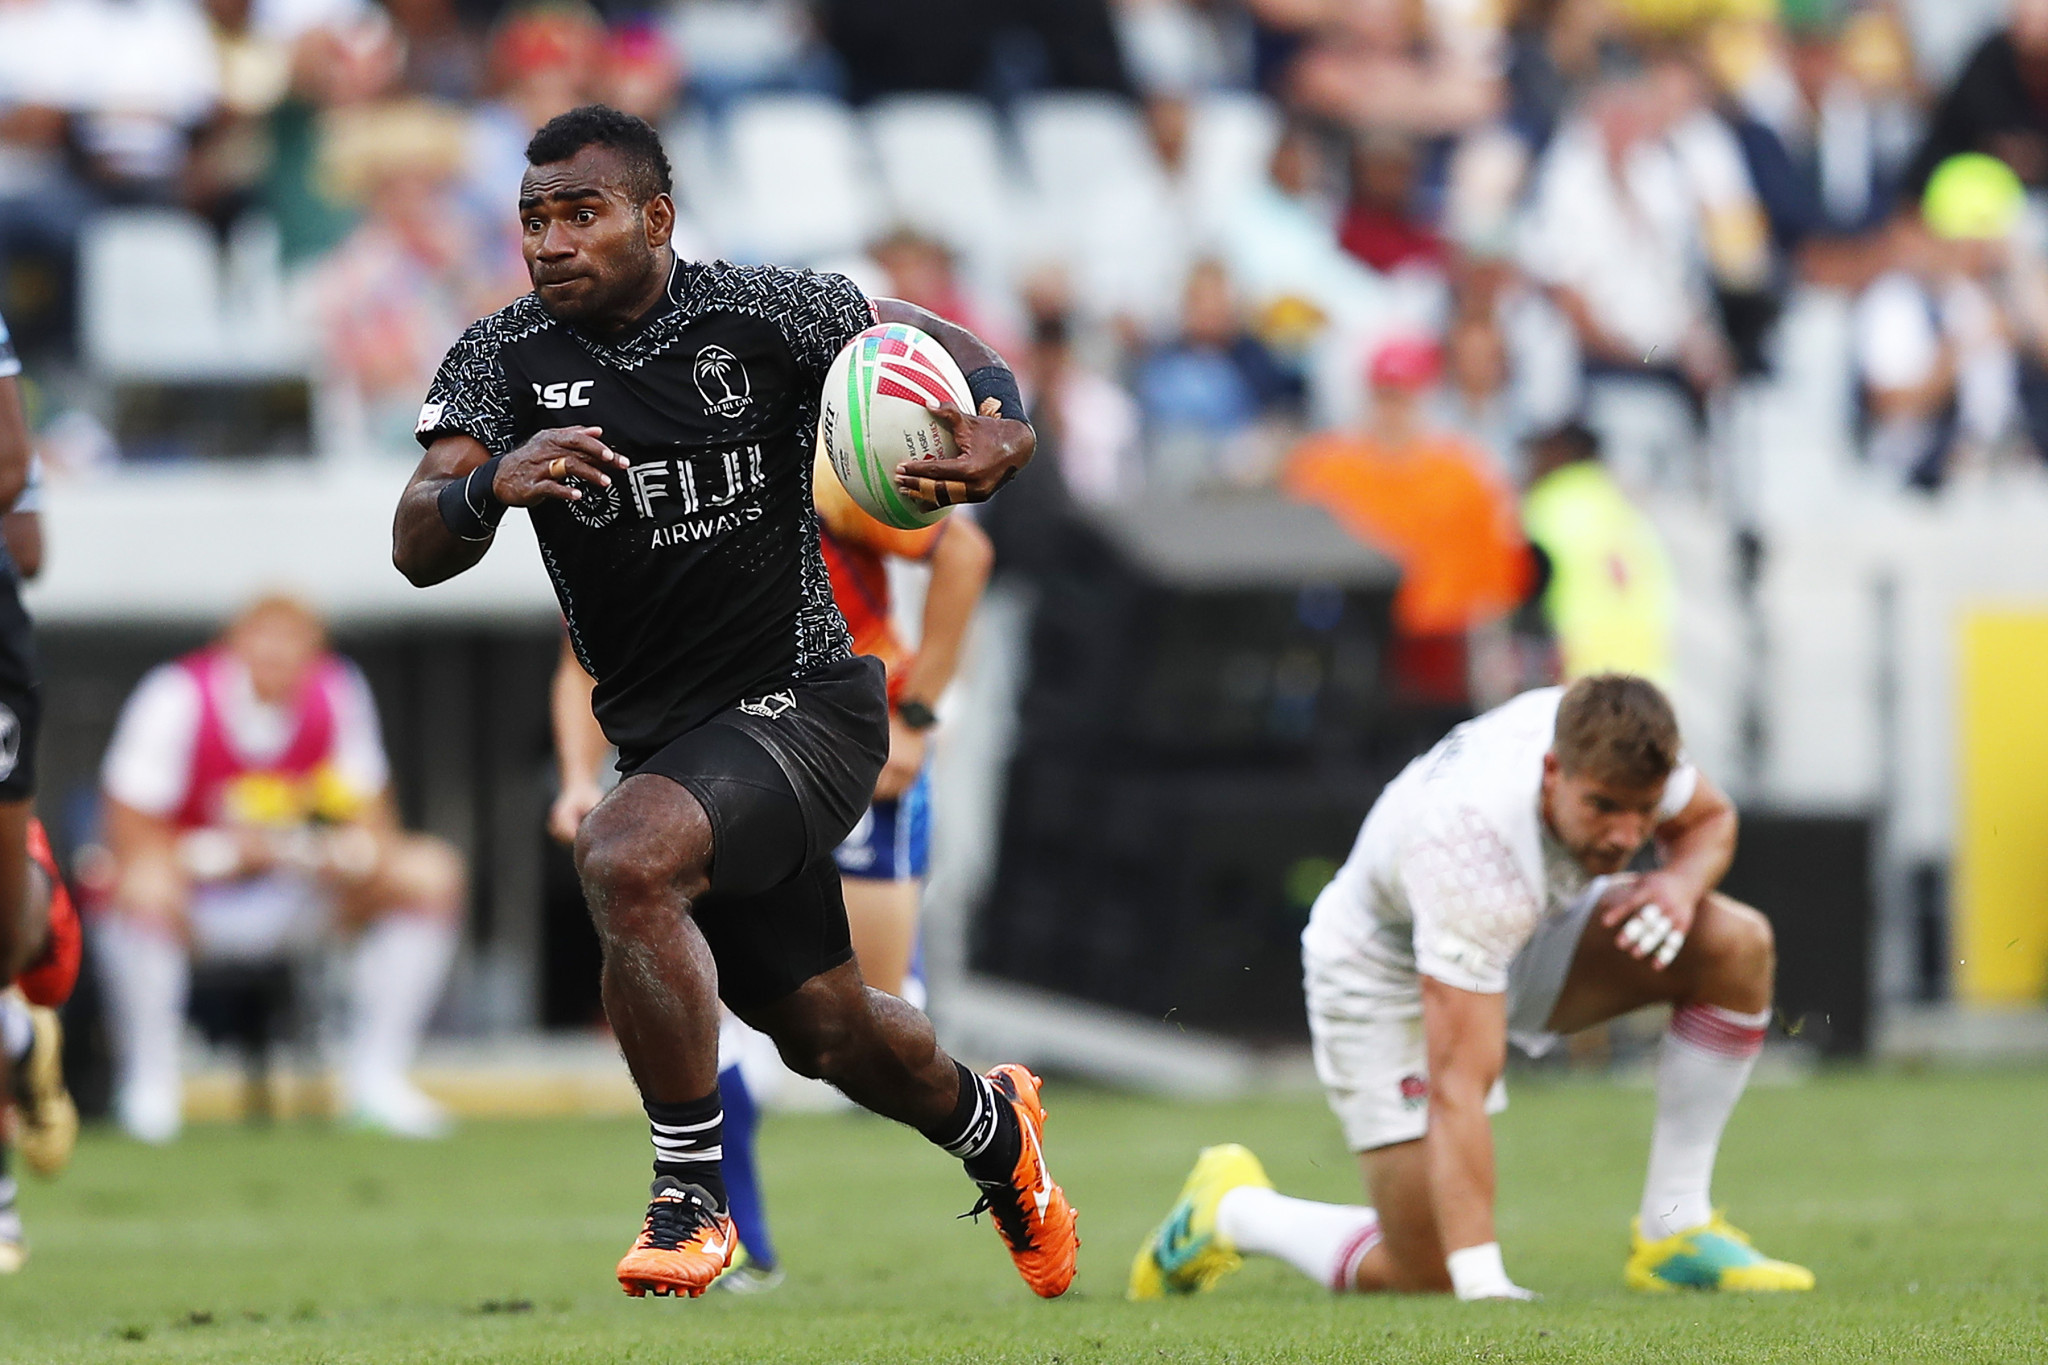 Fiji, Australia and United States unbeaten after first day of World Rugby Sevens Series in Cape Town